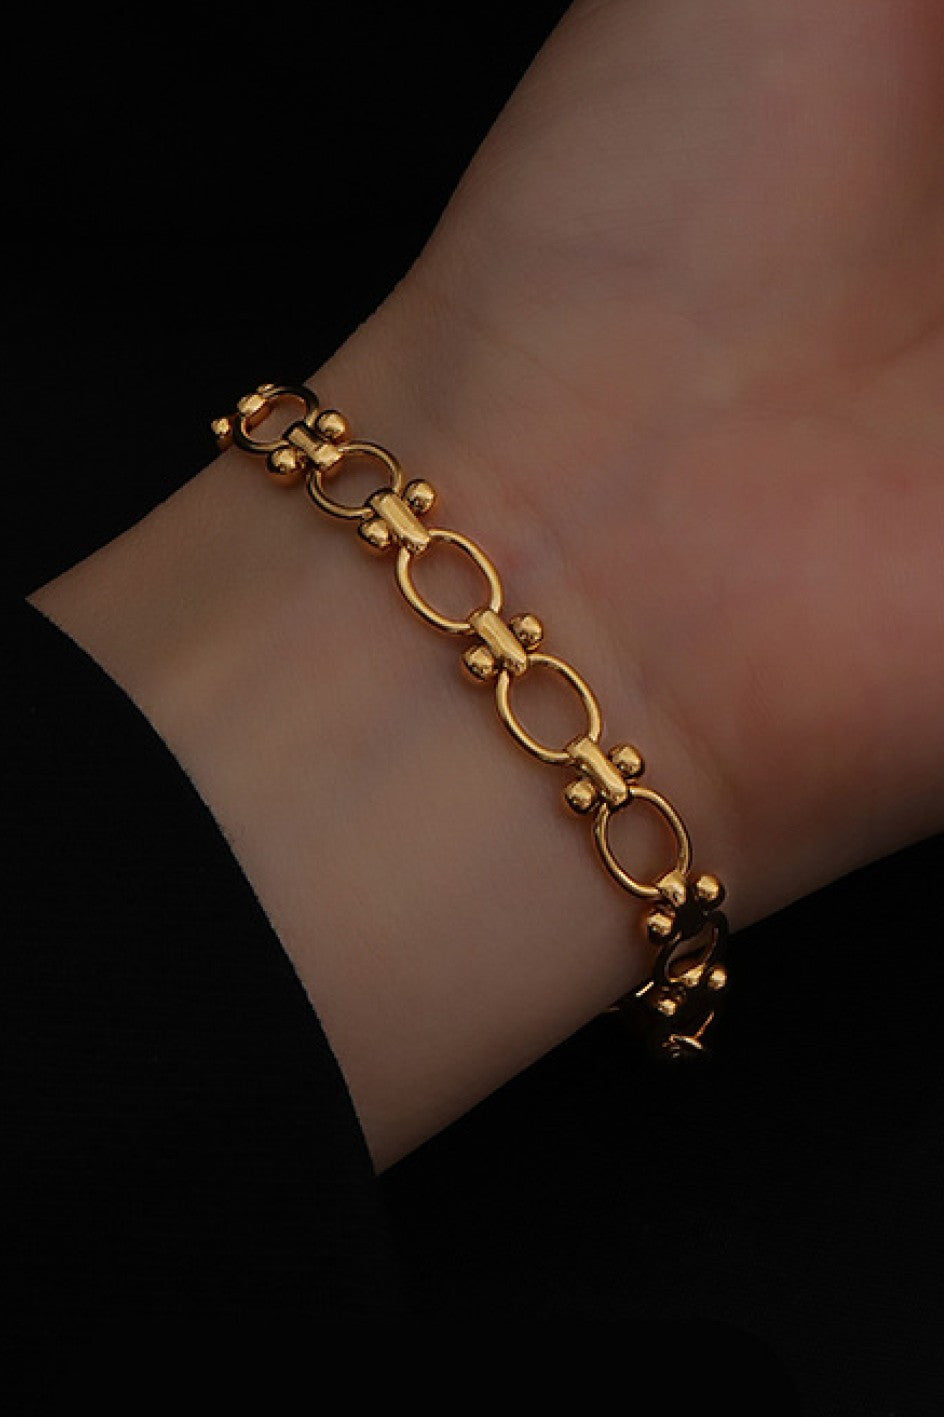 Chain Link Bracelet - Out of the Blue